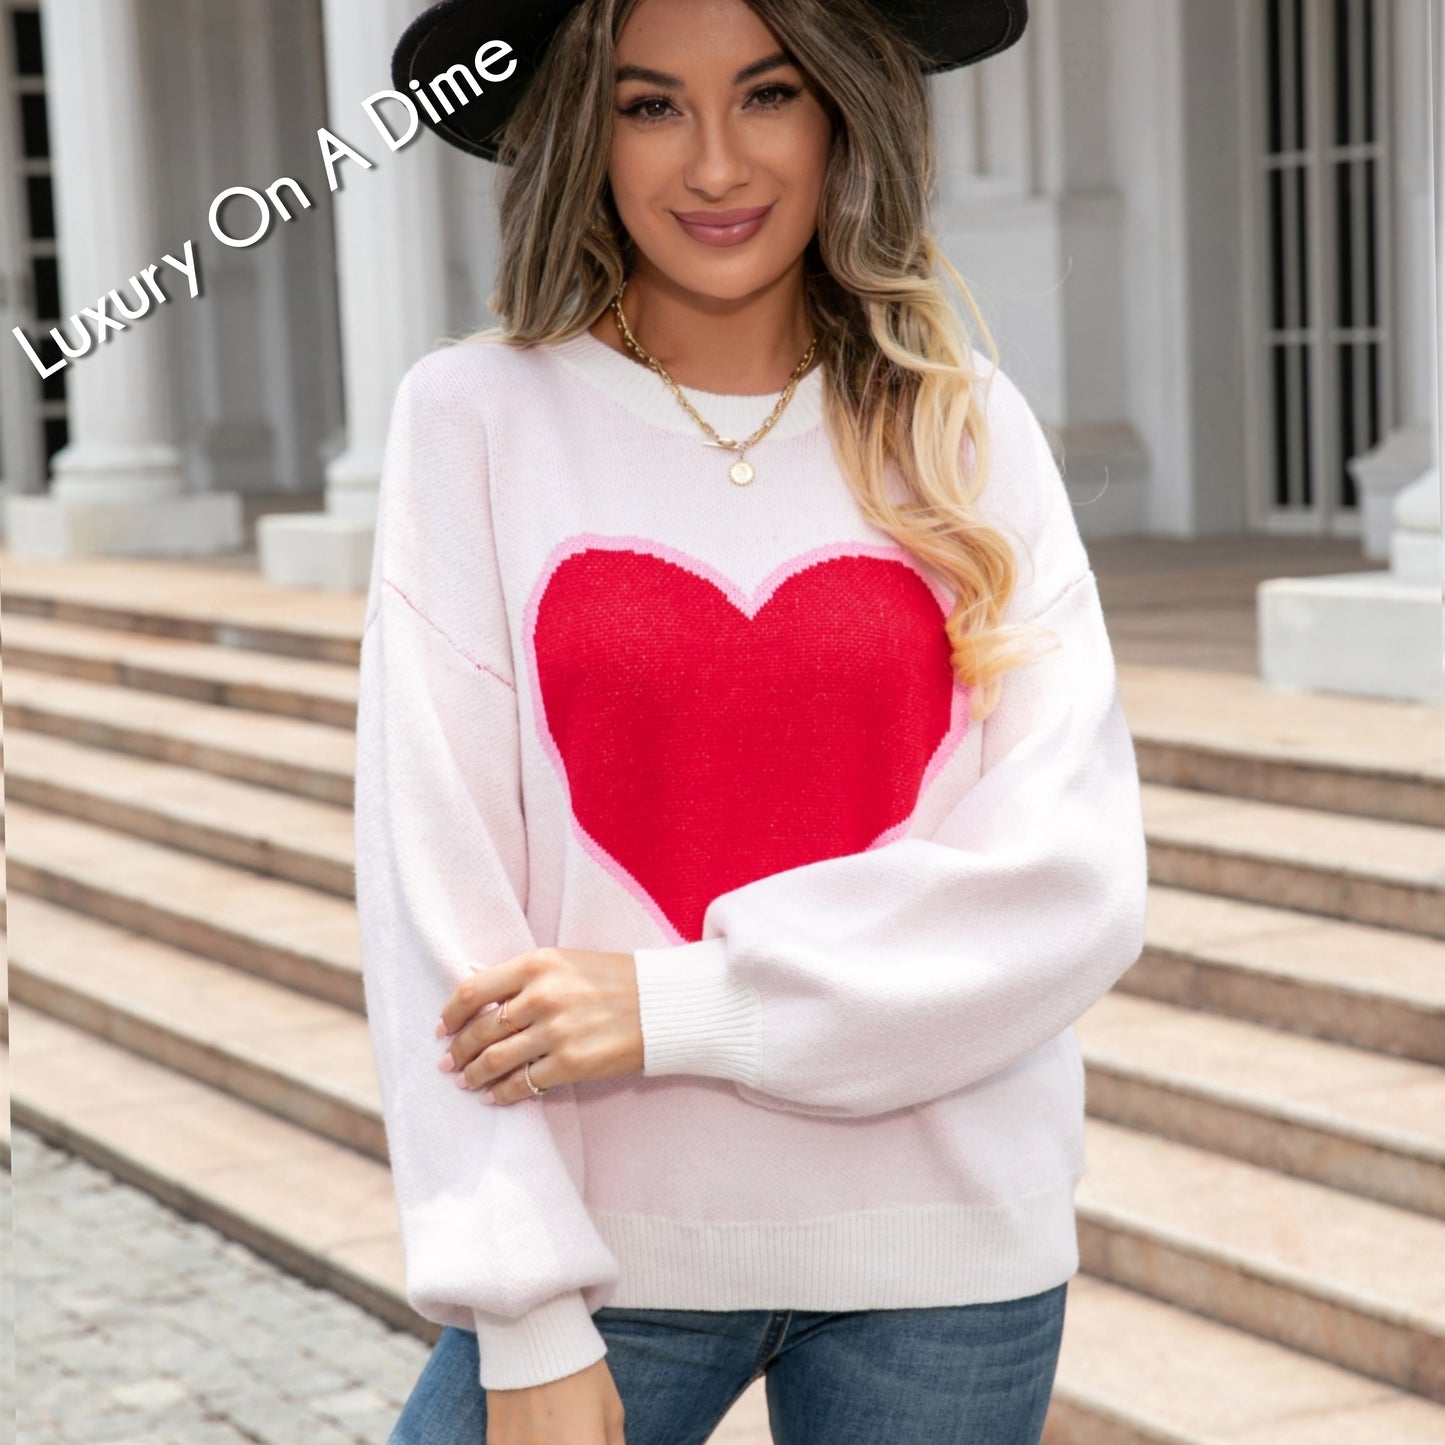 Knit Heart Contrasting Classic Round Neck Pullover Top Long Sleeve Sweater Shirt